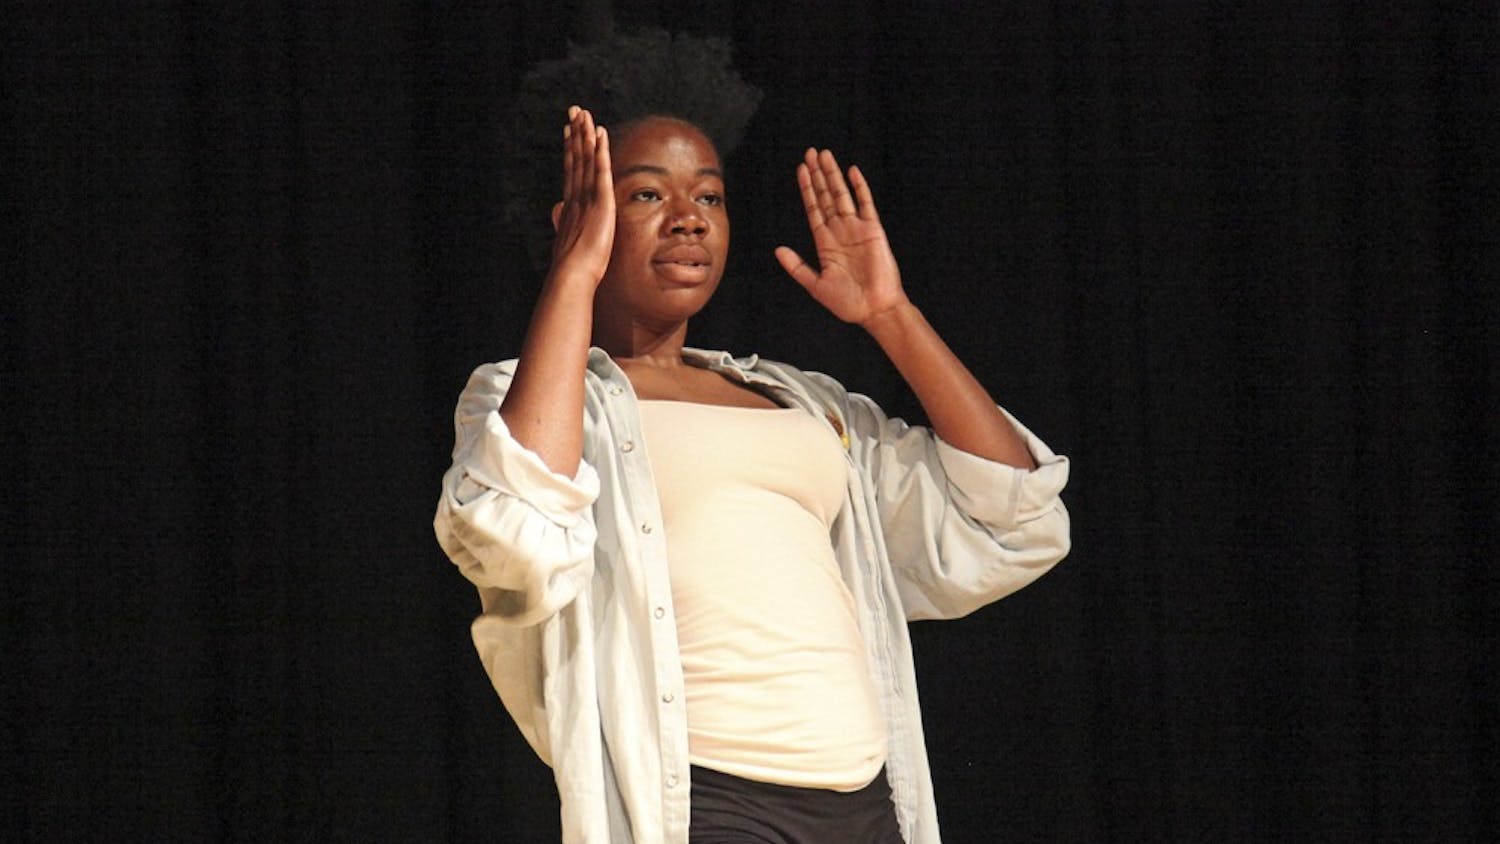 Damola Akintunde performs the opening dance during the Body Politics talk in in the Sonya B. Hayes Stone Center on Wednesday night.